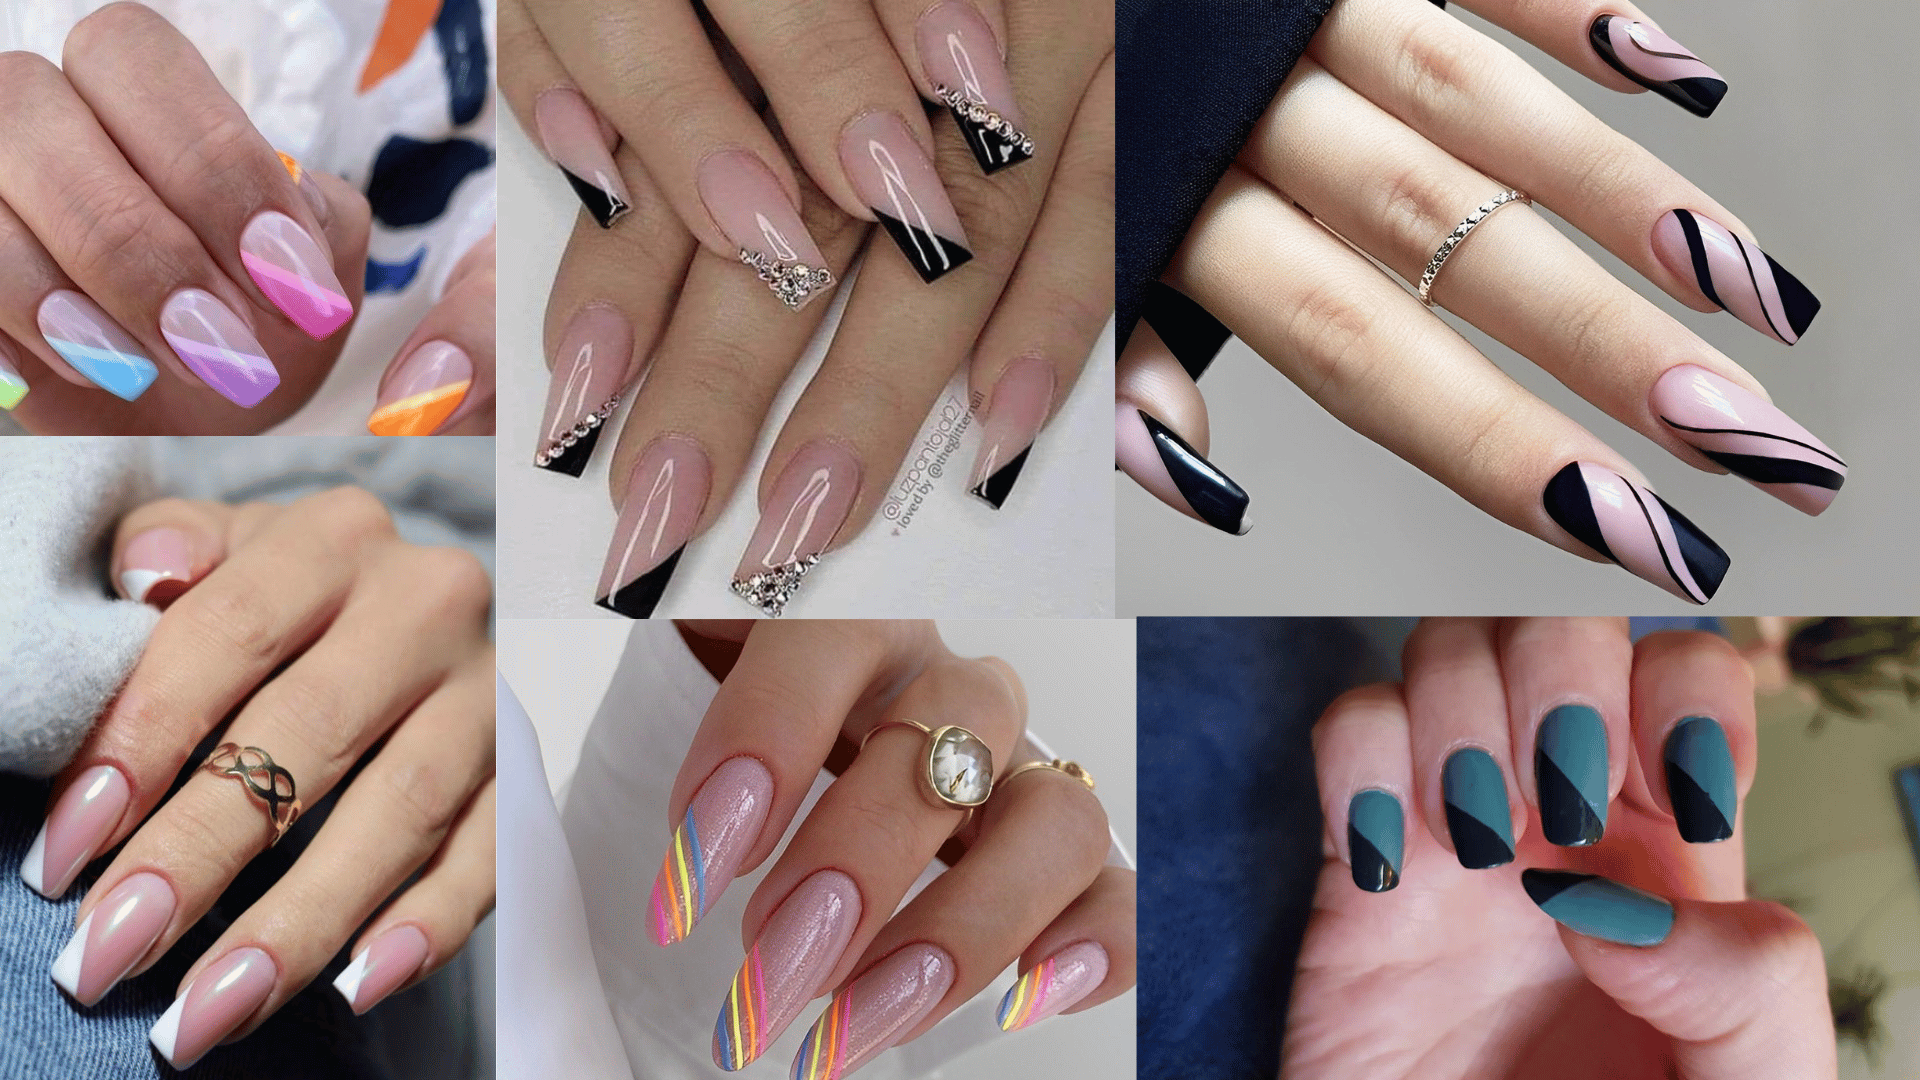 89+ Diagonal Nail Design The Hottest Trend You Need to Try Now!